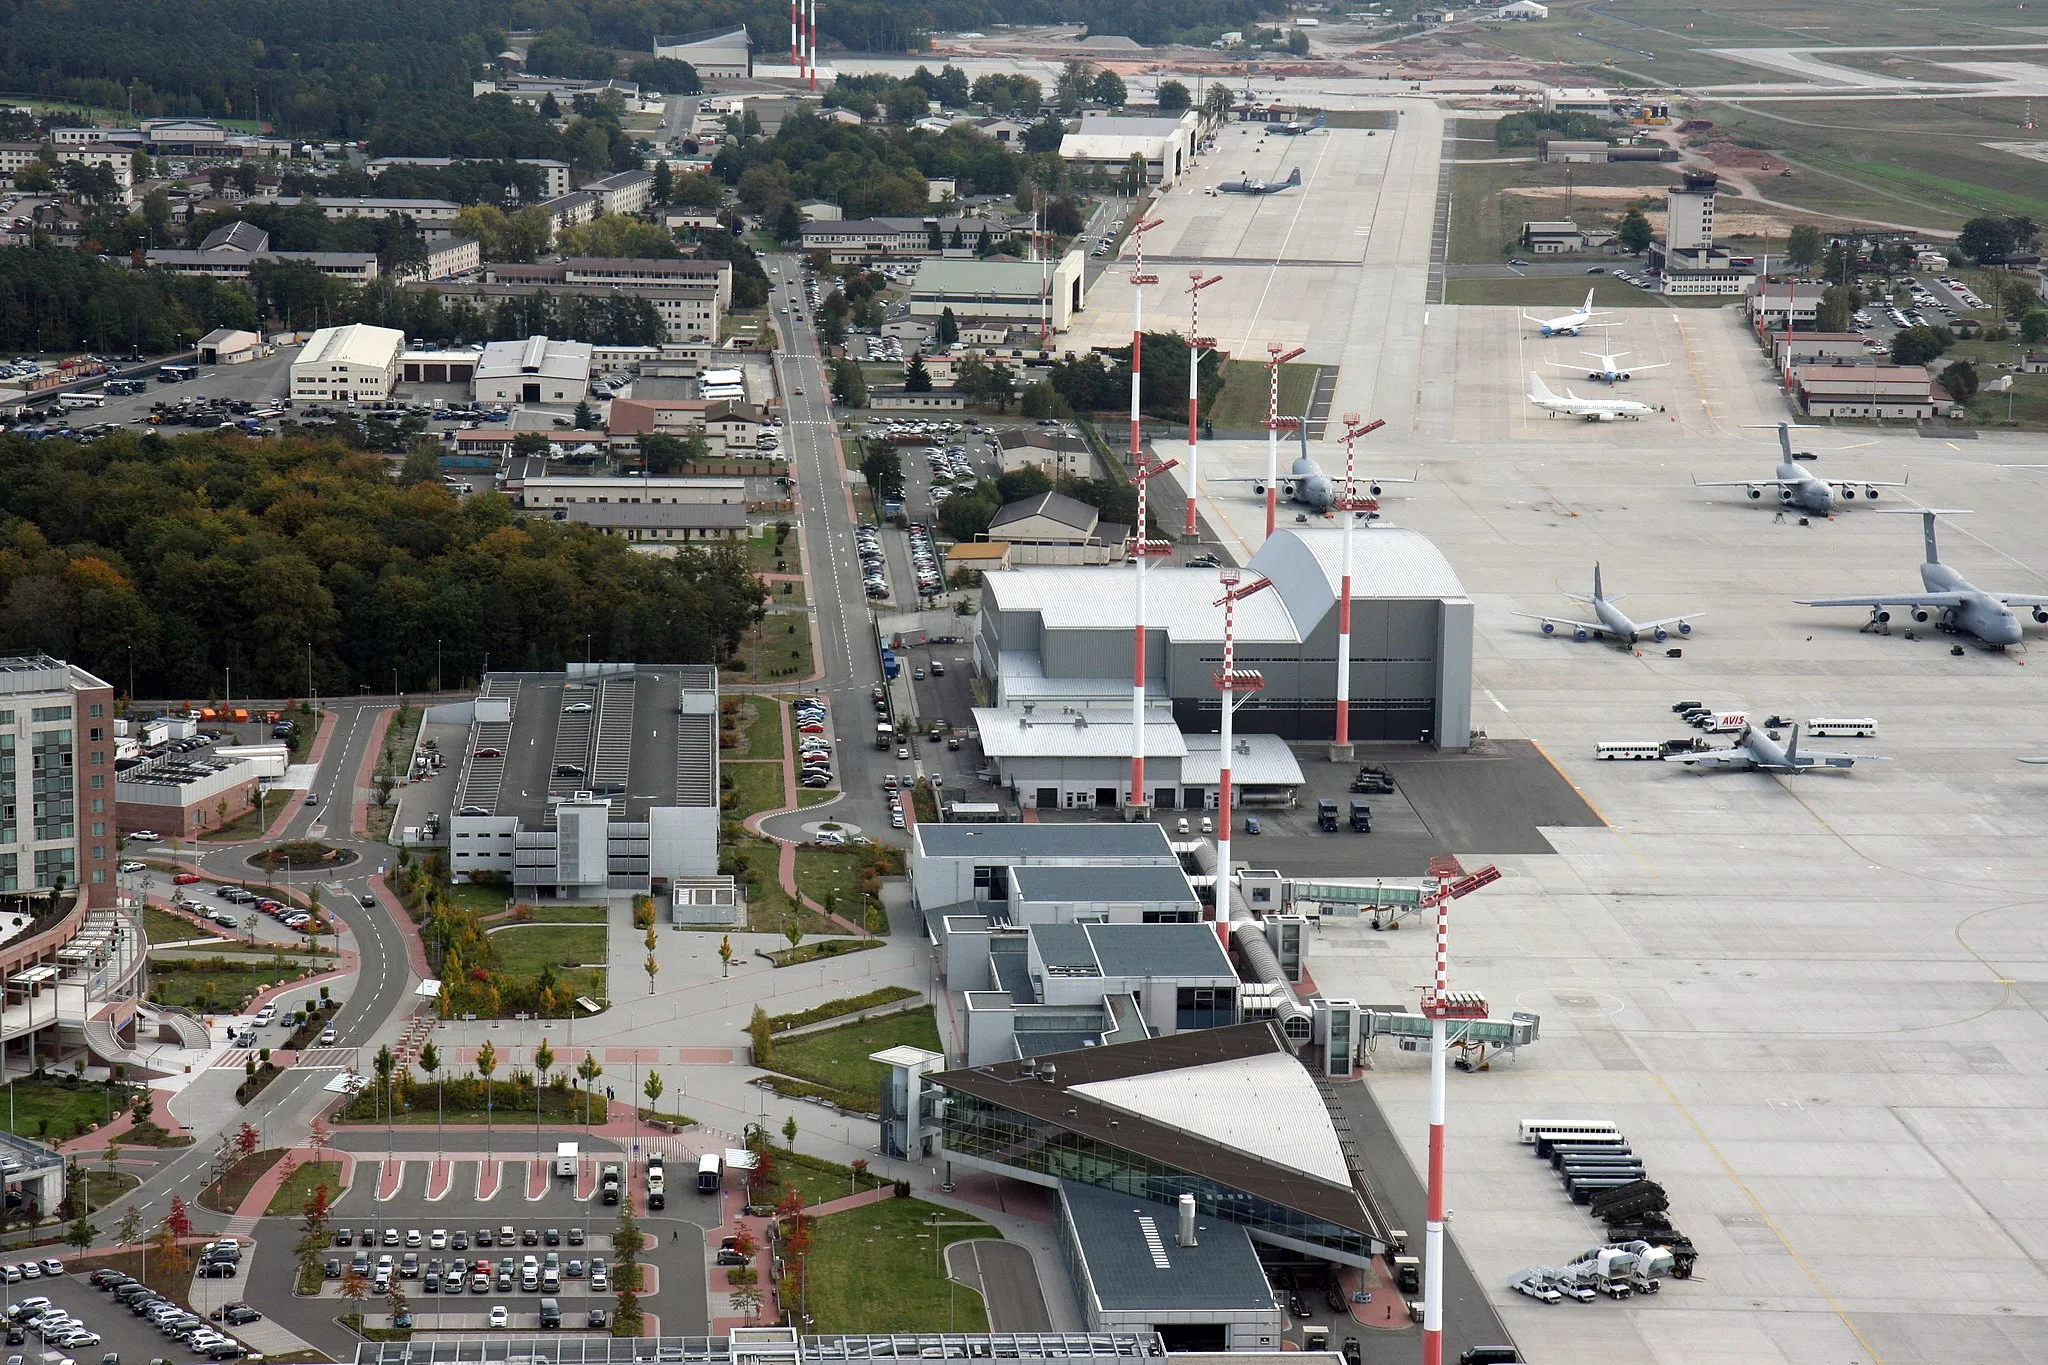 Photo showing: Thanks to the support from the U.S. Army Corps of Engineers Europe District, which managed the construction of new ramps, hangars, warehouses, a passengar terminal and more on the Ramstein flightline, the air base is now a major hub for mobility and airlift operations throughout Europe and downrange, hosting a variety of aircraft on its flightline. (U.S. Army Corps of Engineers photo by Justin Ward)